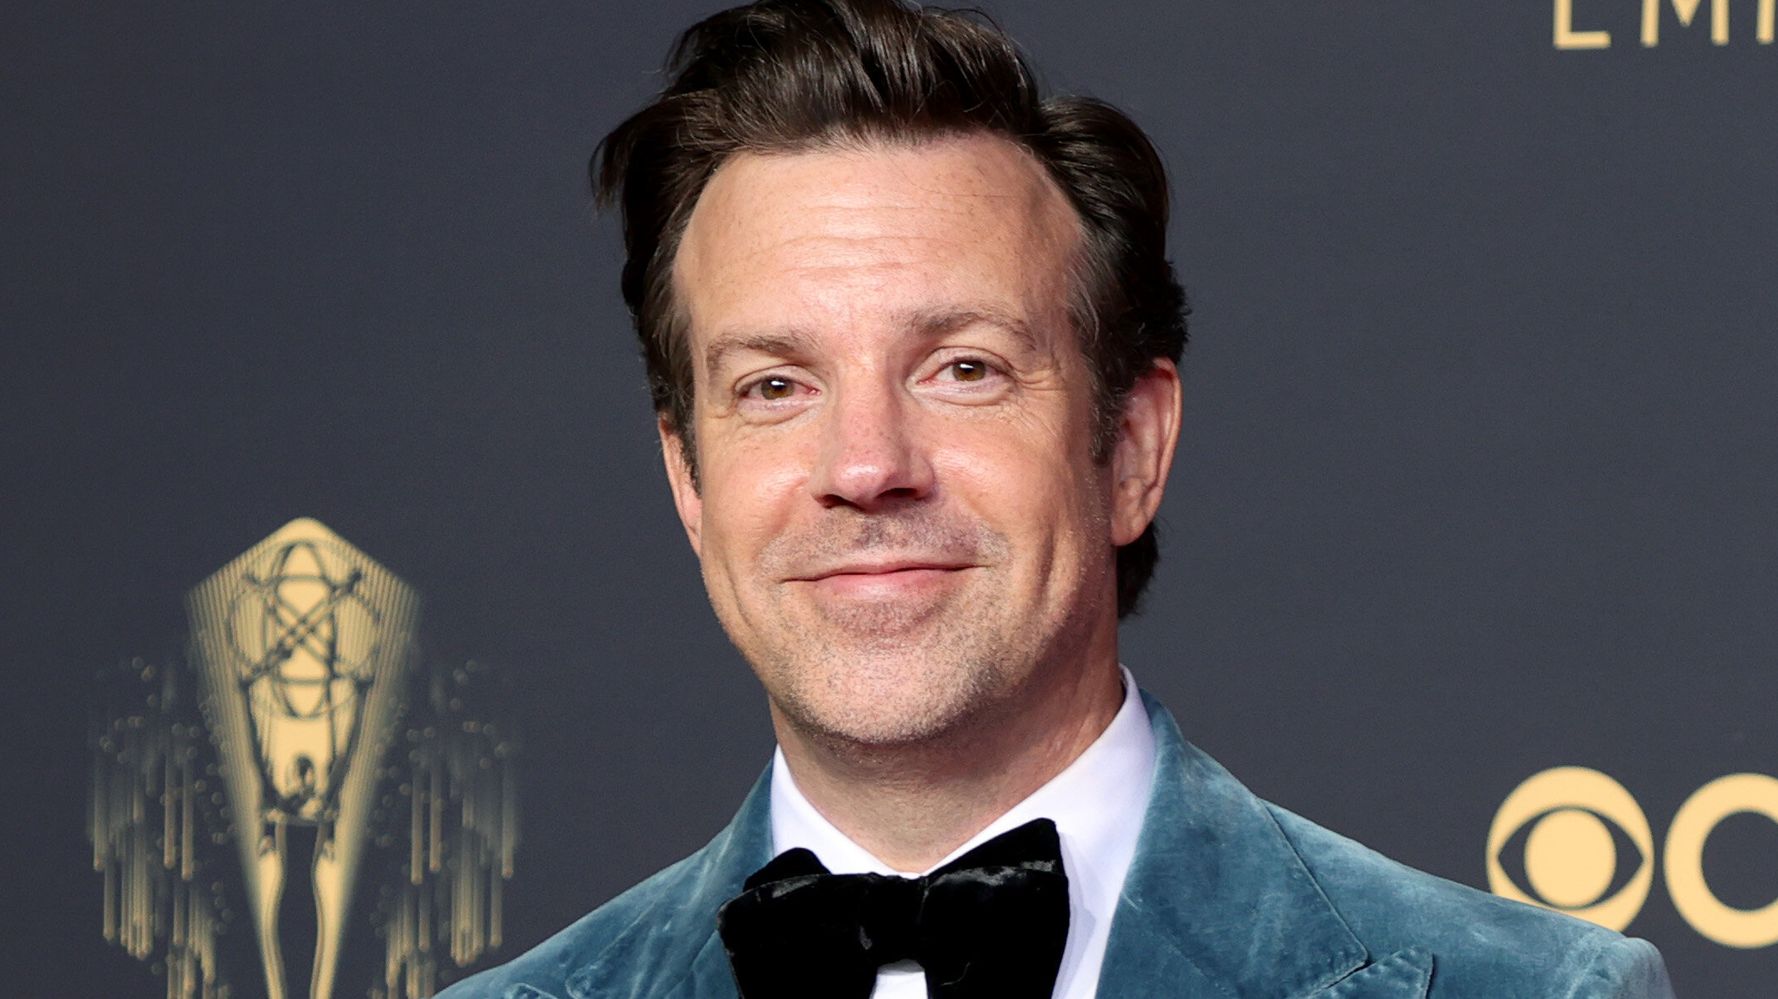 Jason Sudeikis Shows Off What May Be The Best Card Trick Of All Time